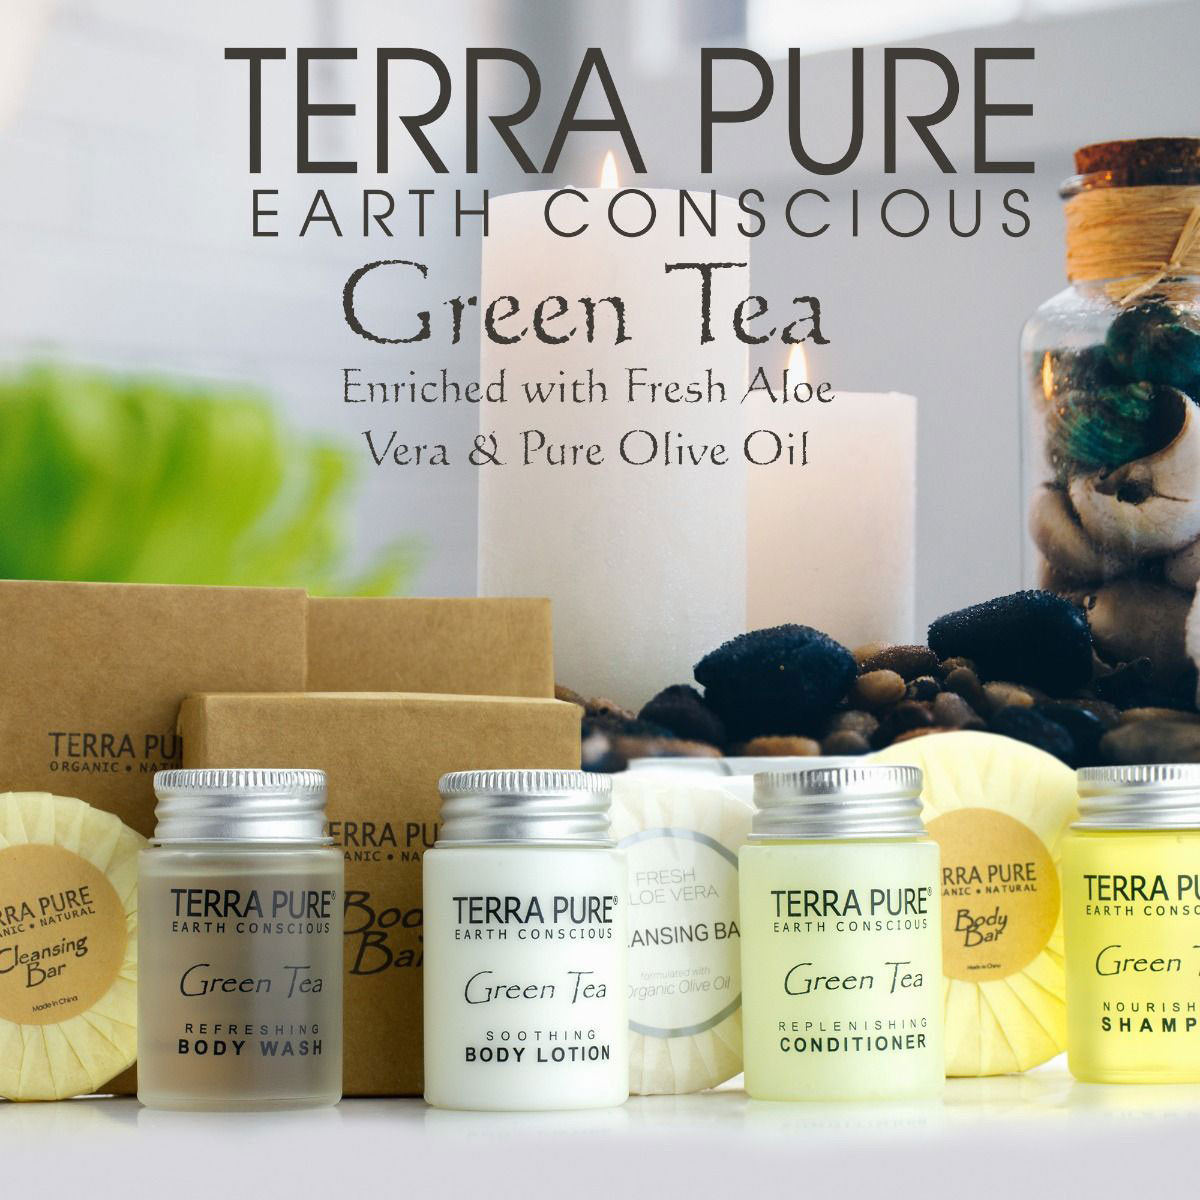 What makes the TERRA PURE GREEN TEA Collection stand out?